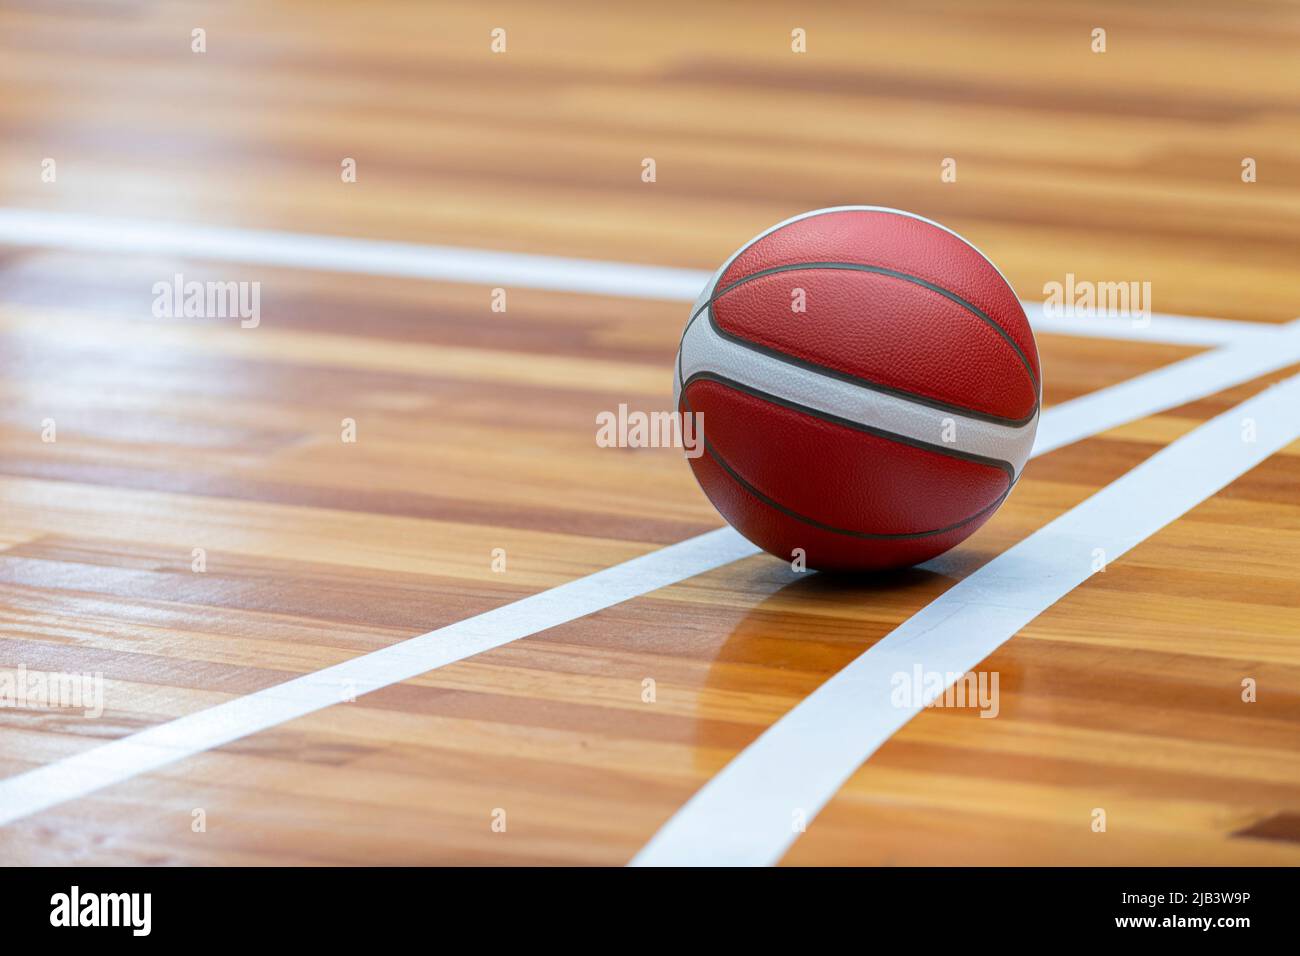 Basketball court wooden floor with professional orange leather ball and shadows. Horizontal sport poster, greeting cards, headers, website Stock Photo